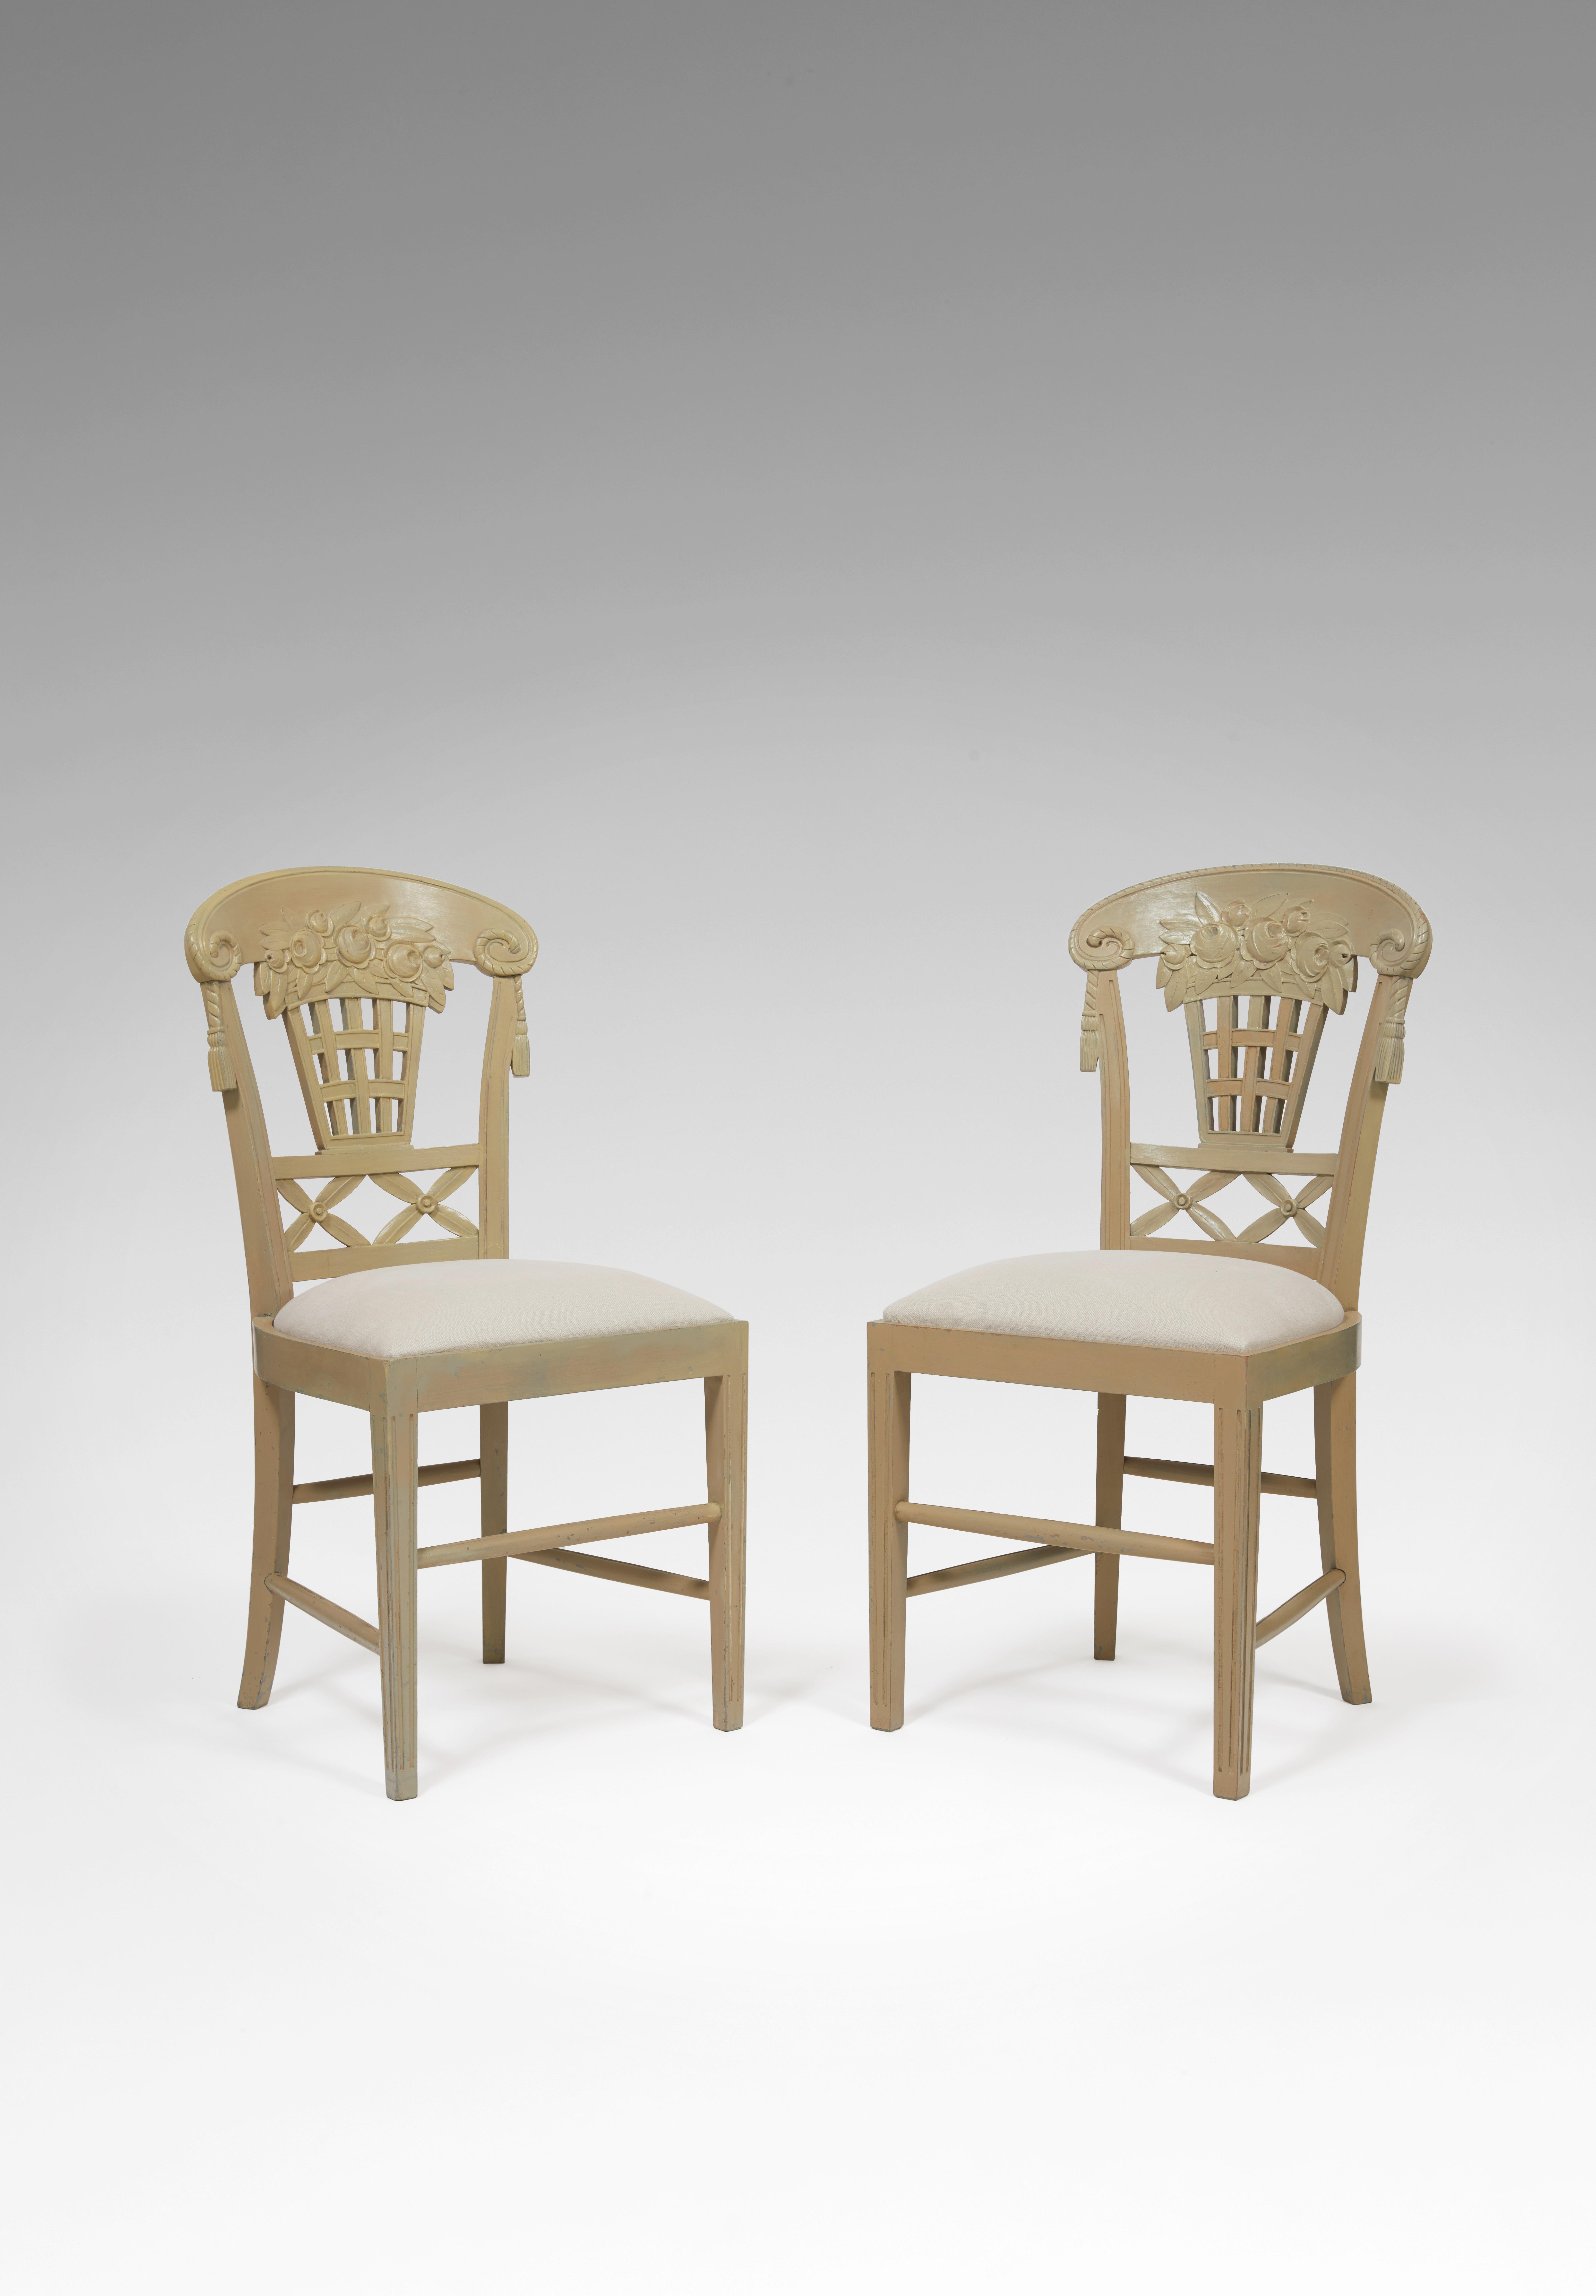 French André Groult, Set of Two Chairs Carved from Louis Sue's Drawings, circa 1912